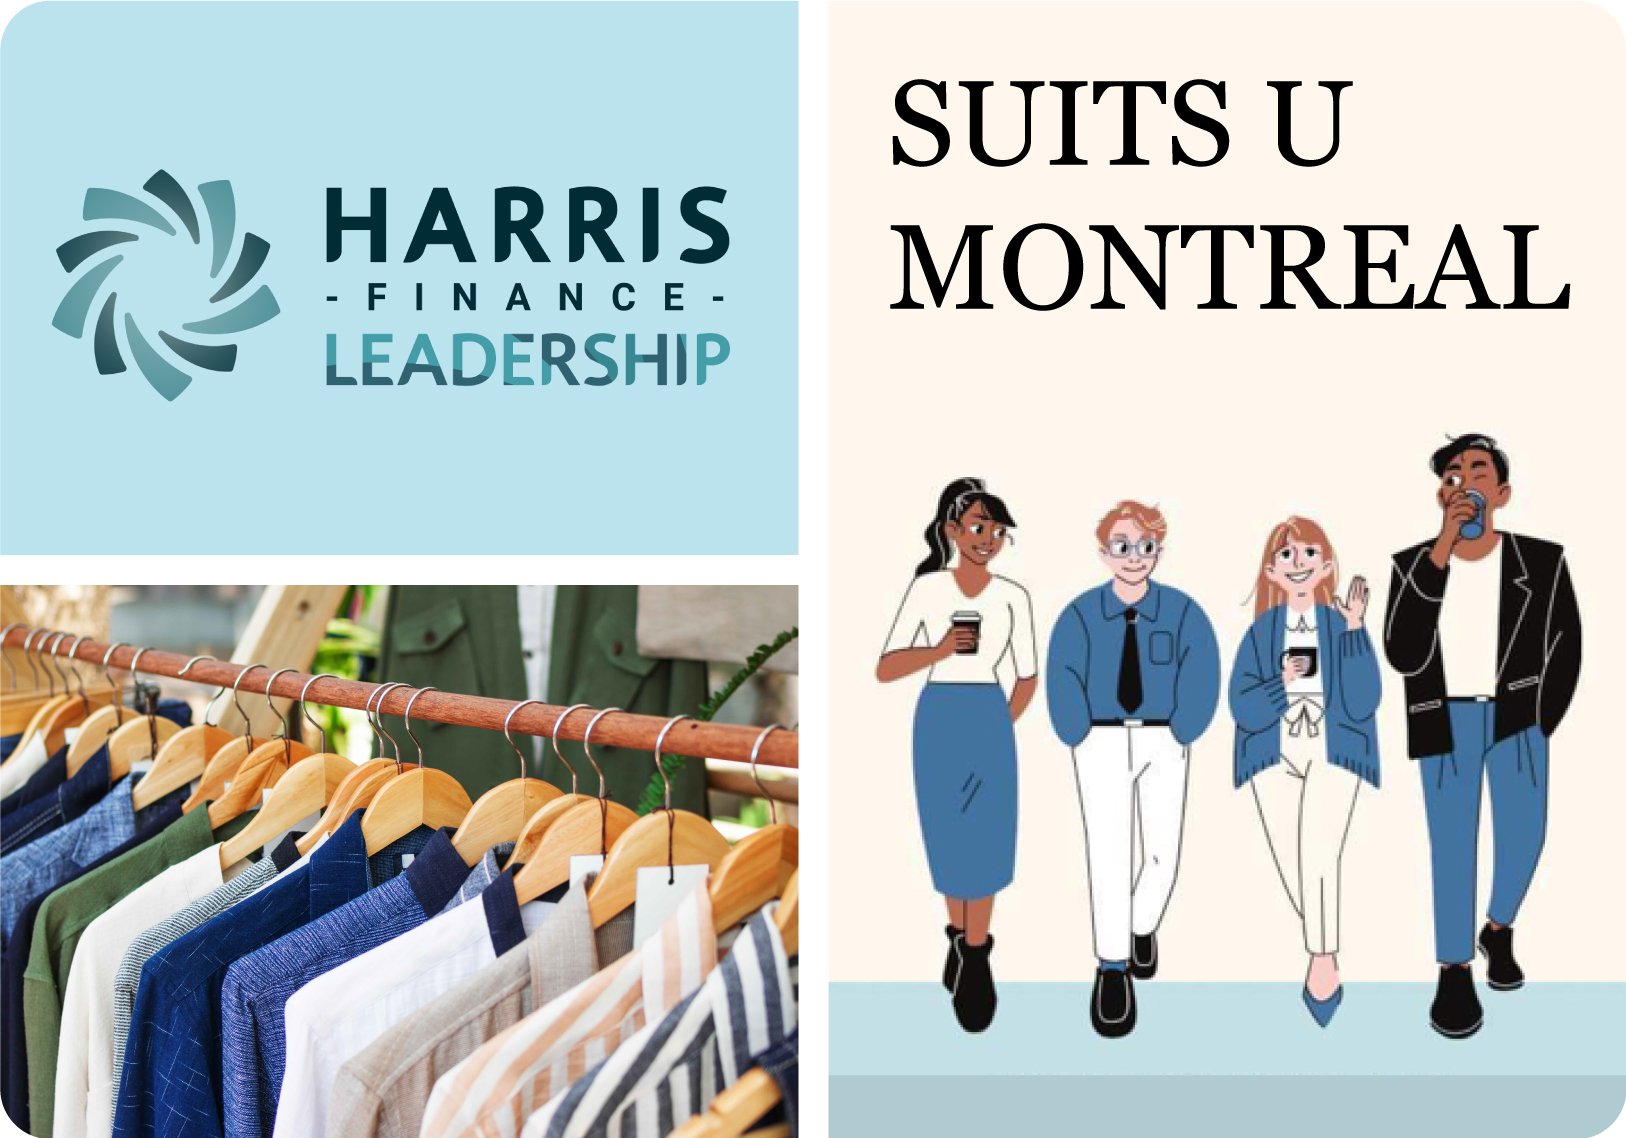 Photo collage of Harris community service at Suits U Montreal